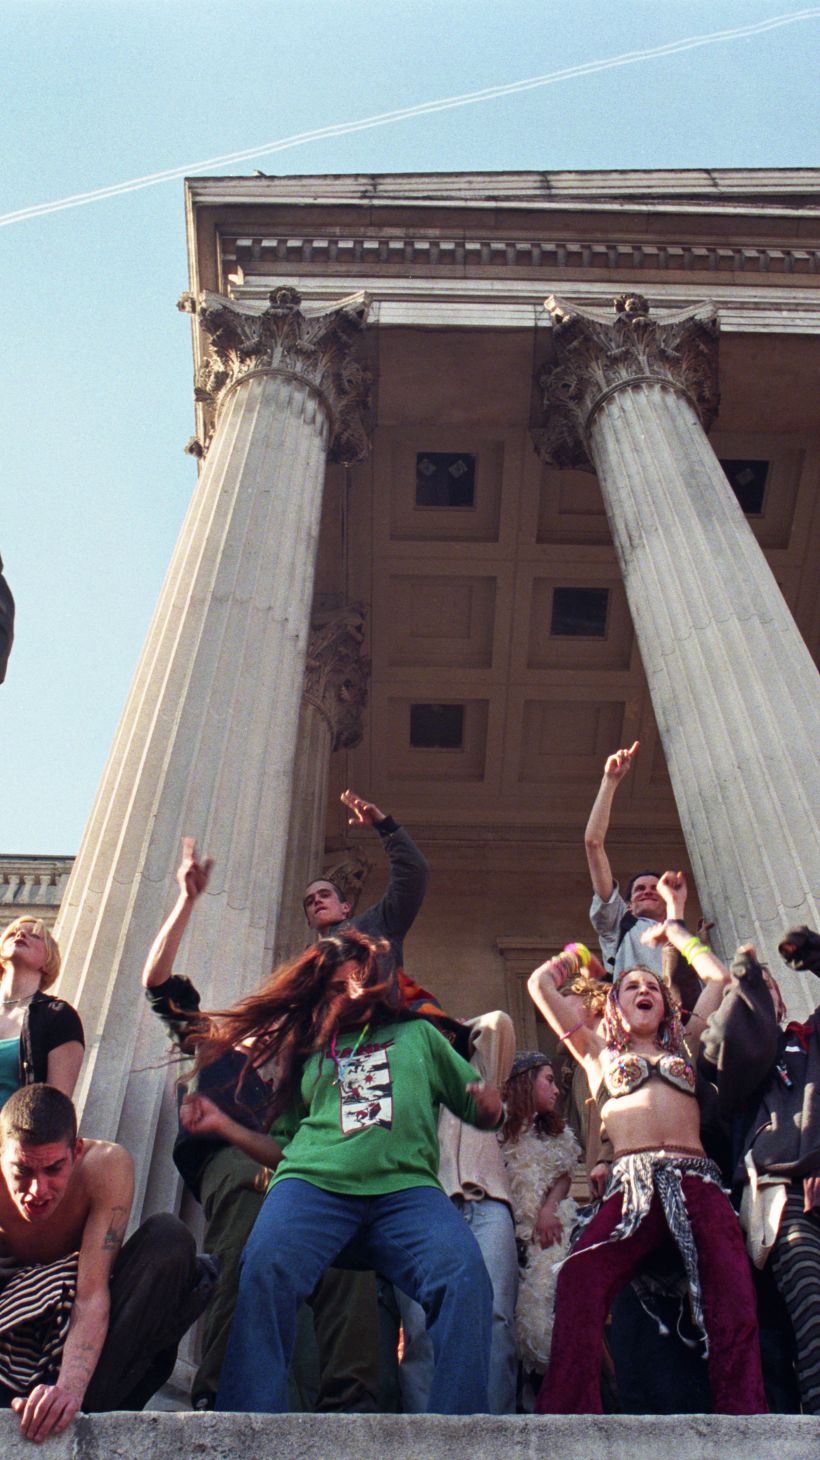 Reclaim the Streets activists gather in Trafalgar Square in 1997